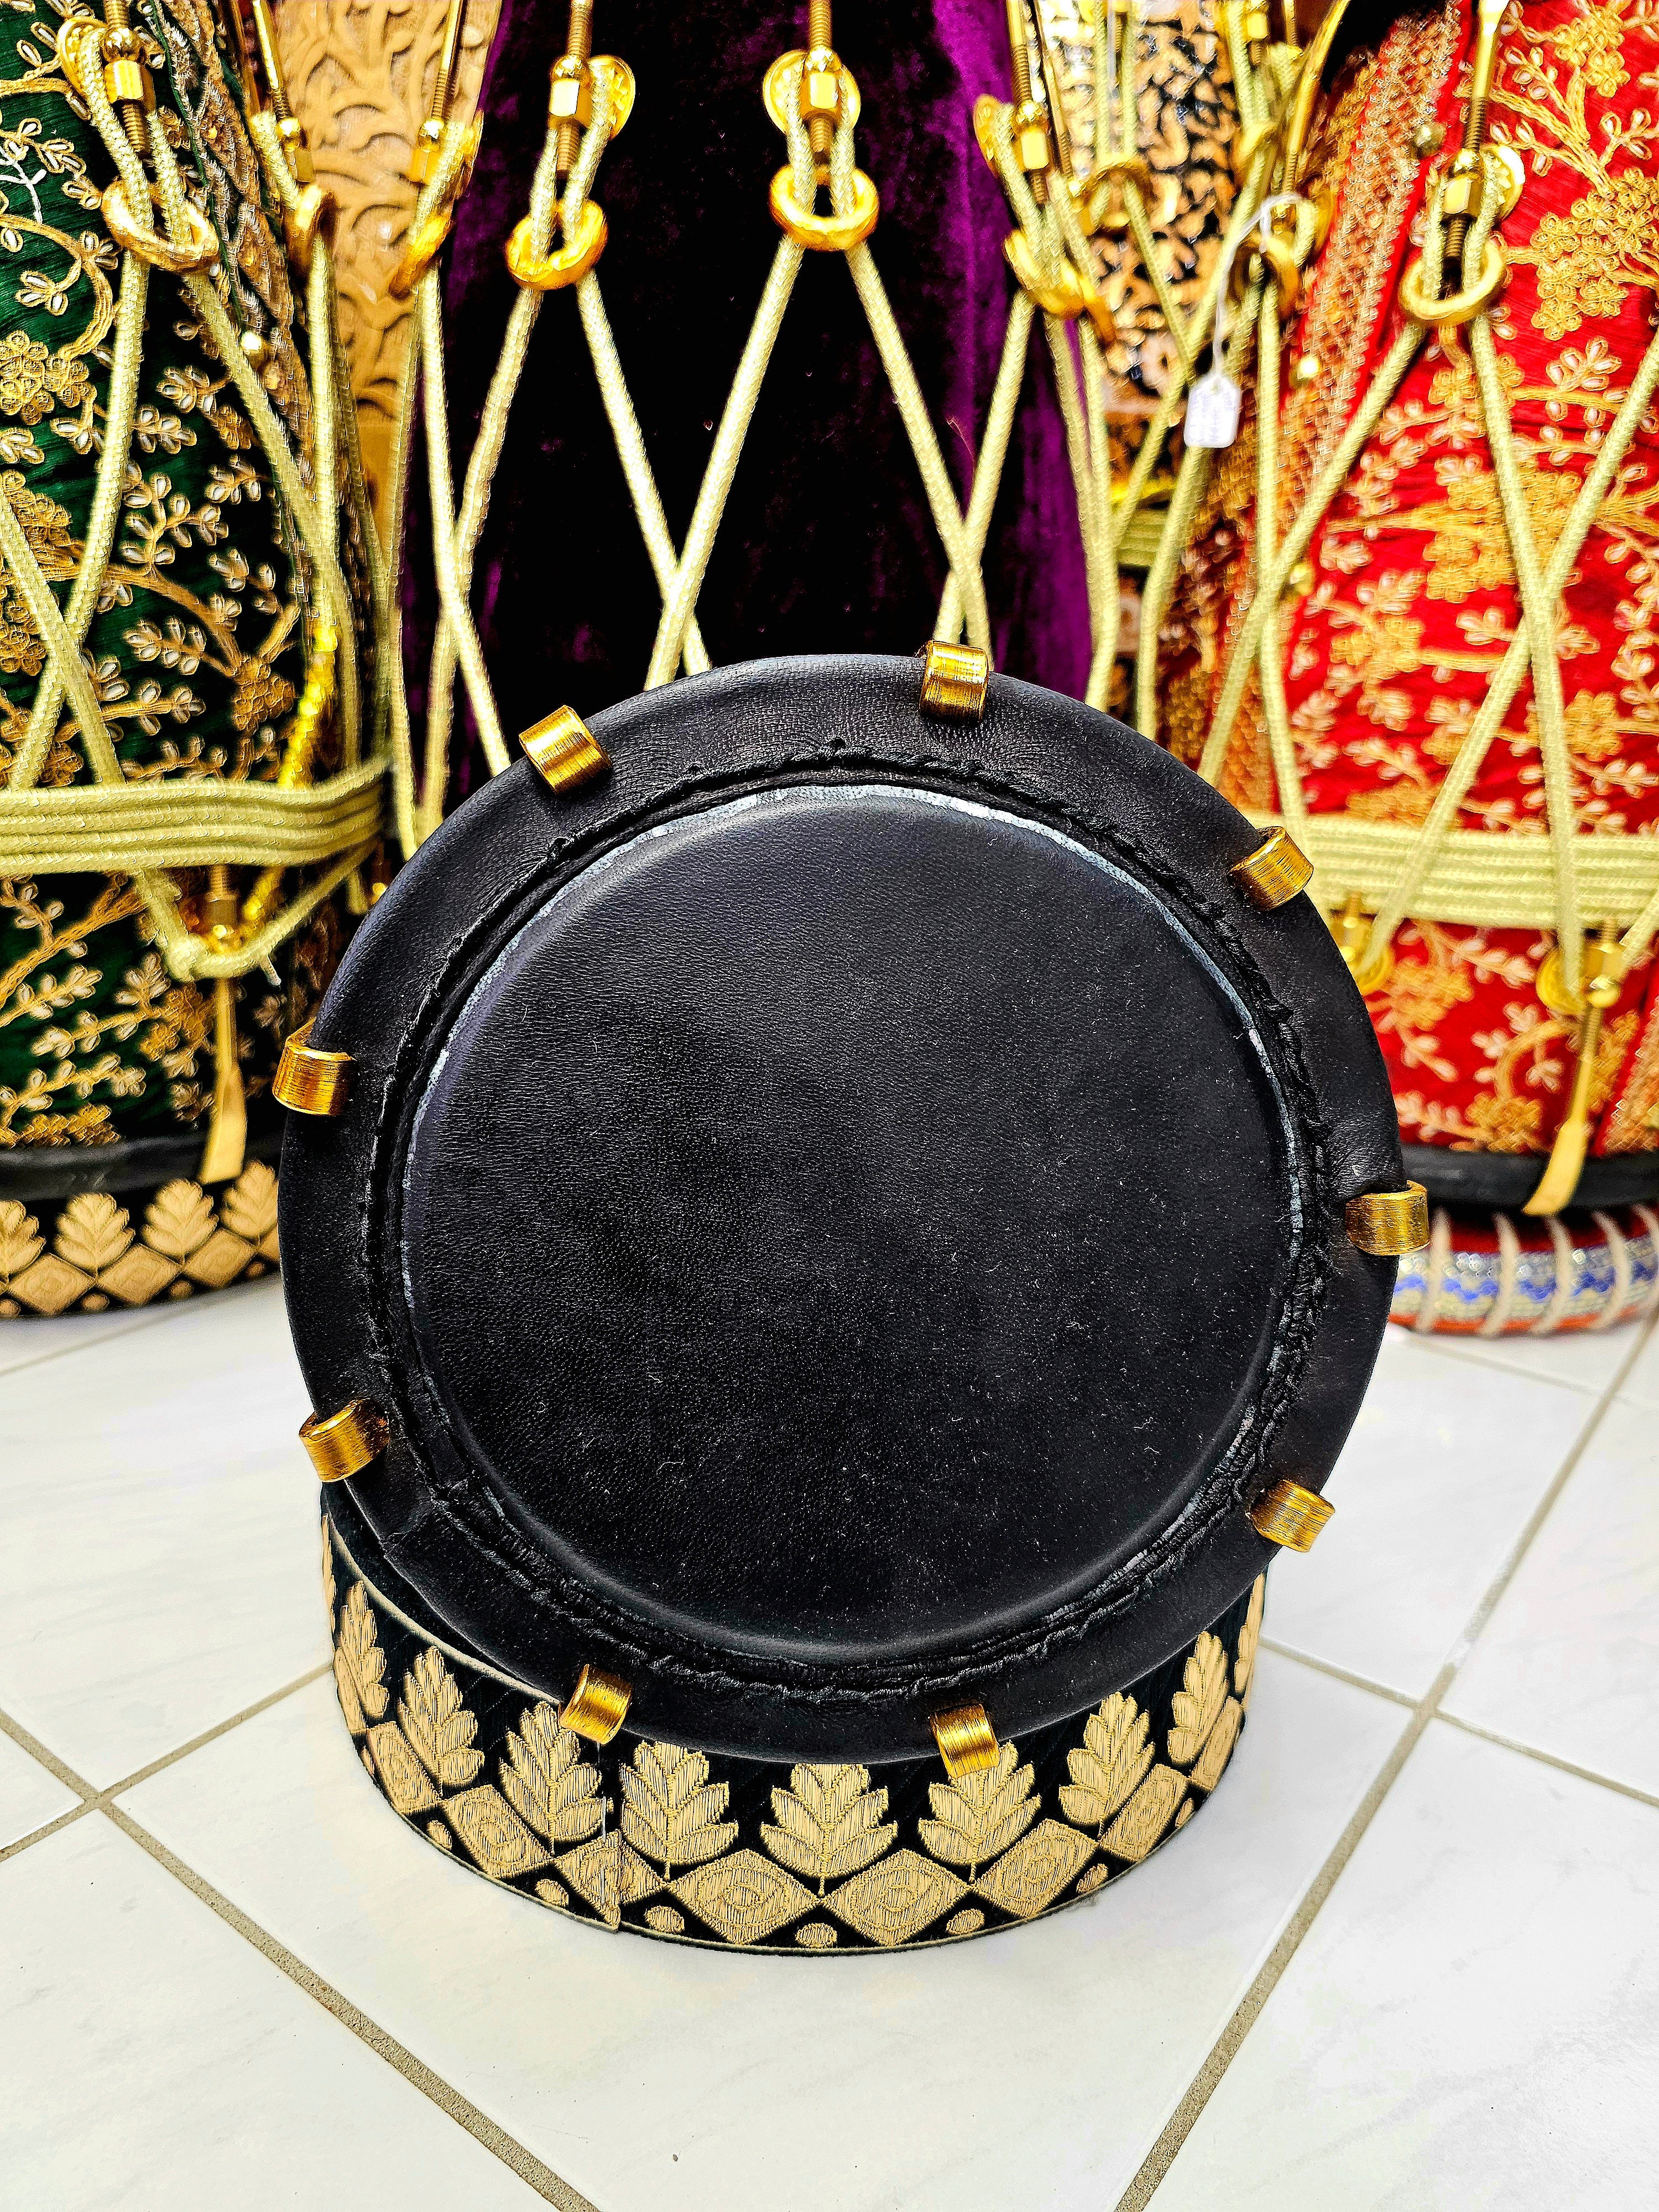 Sapphire Serenade: 6.25" Red Sheesham Half-Dholak with Blue Velvet Wrap, Golden Brass Accents, Ropes Design, and Ebony Black Skin *Minor Skin Discolouration*